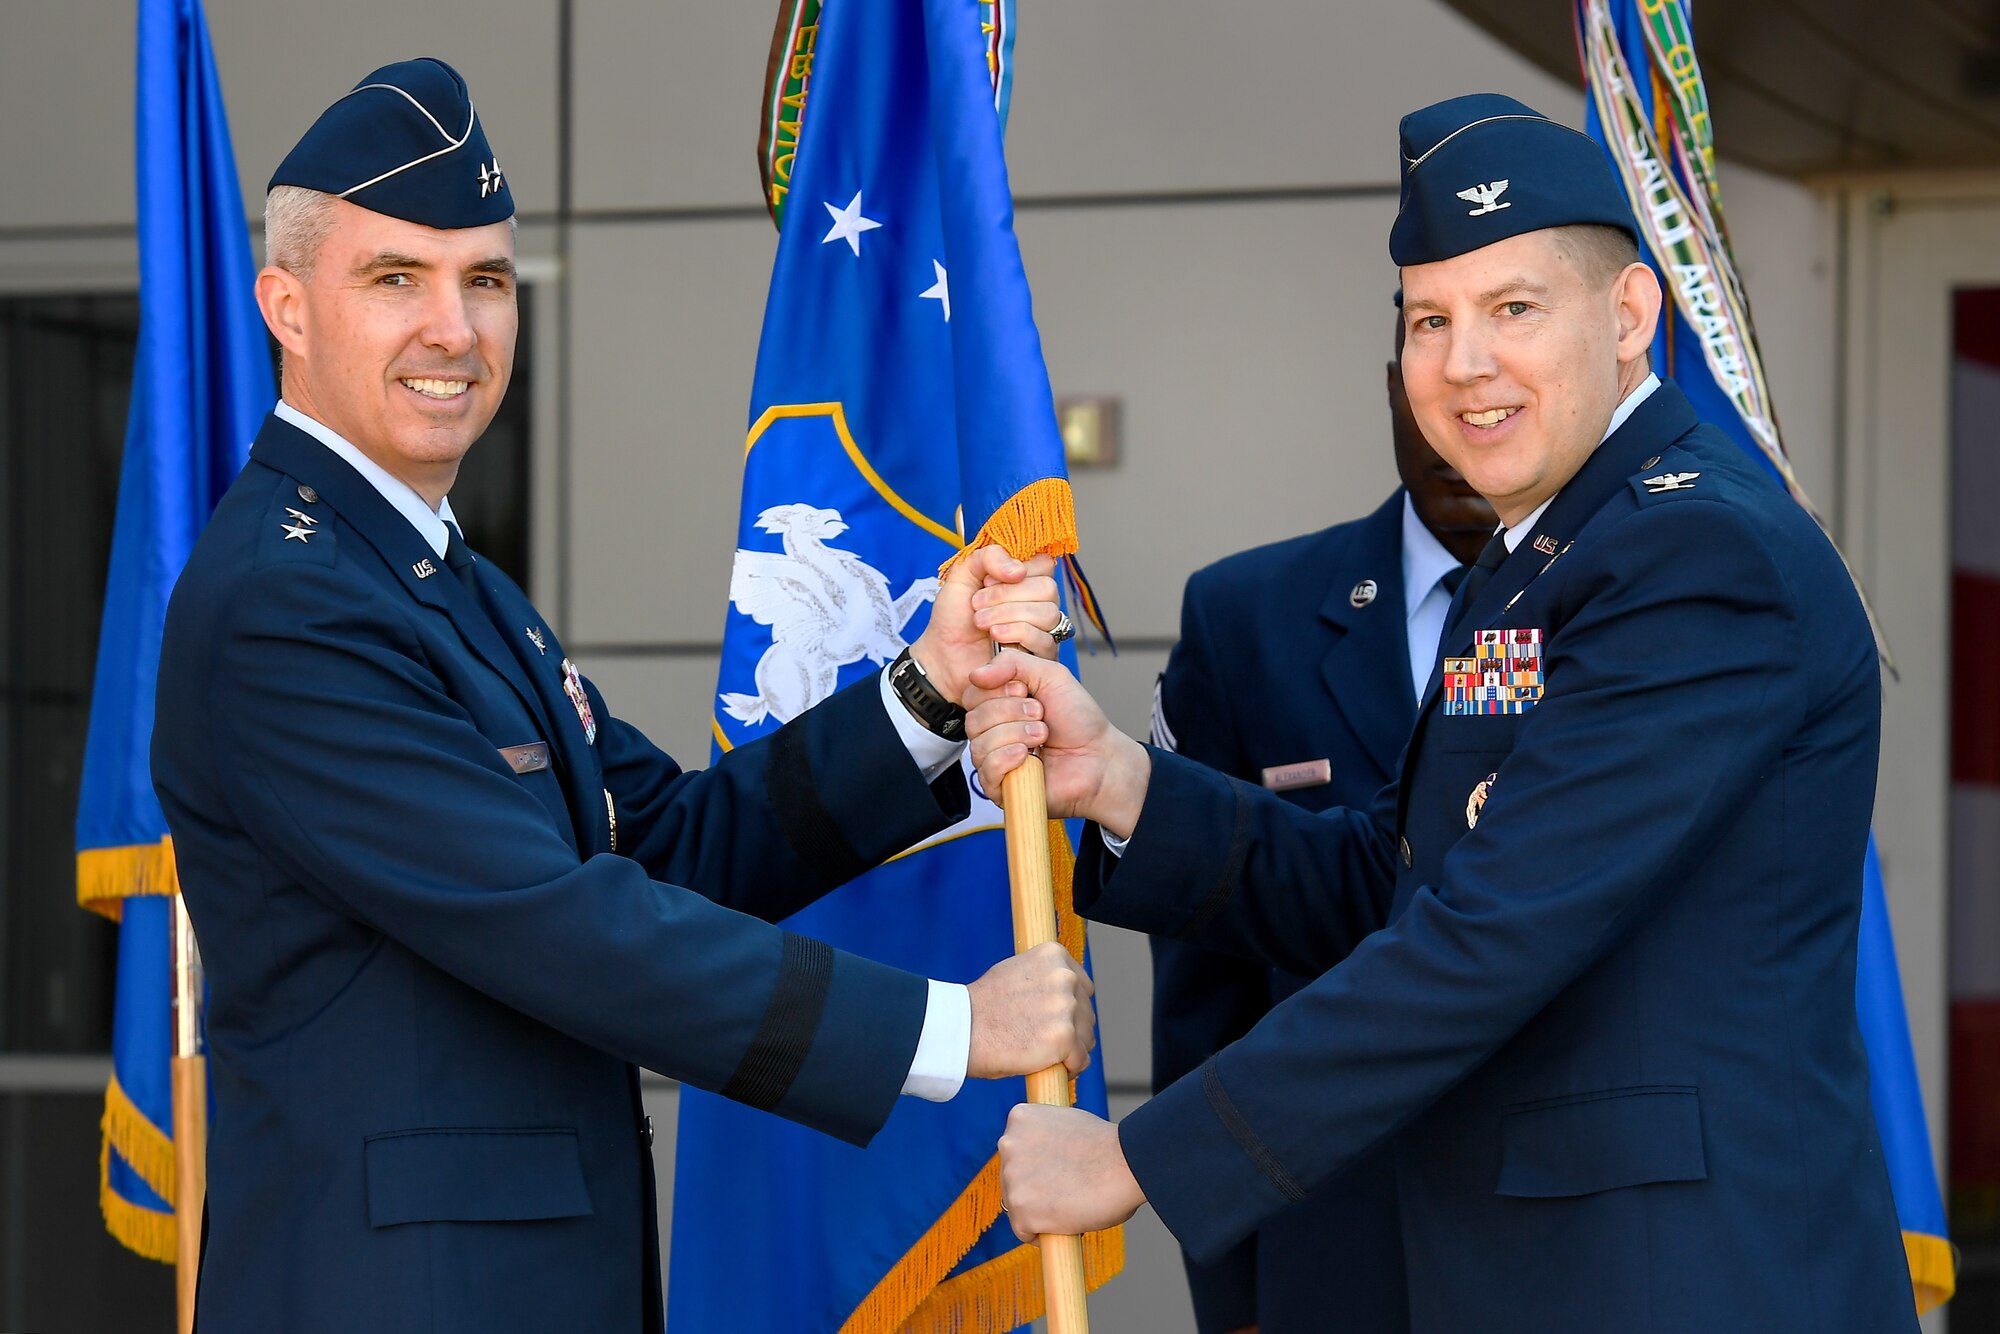 Maj. Gen. Stephen Whiting, Fourteenth Air Force commander, passes the guidon to Col. James Smith, 50th Space Wing commander, during a change of command ceremony in front of the DeKok building at Schriever Air Force Base, Colorado, June 24, 2019. Smith comes to the 50th SW from Air Force Element, RAF Menwith Hill, United Kingdom. (U.S. Air Force photo by Kathryn Calvert)